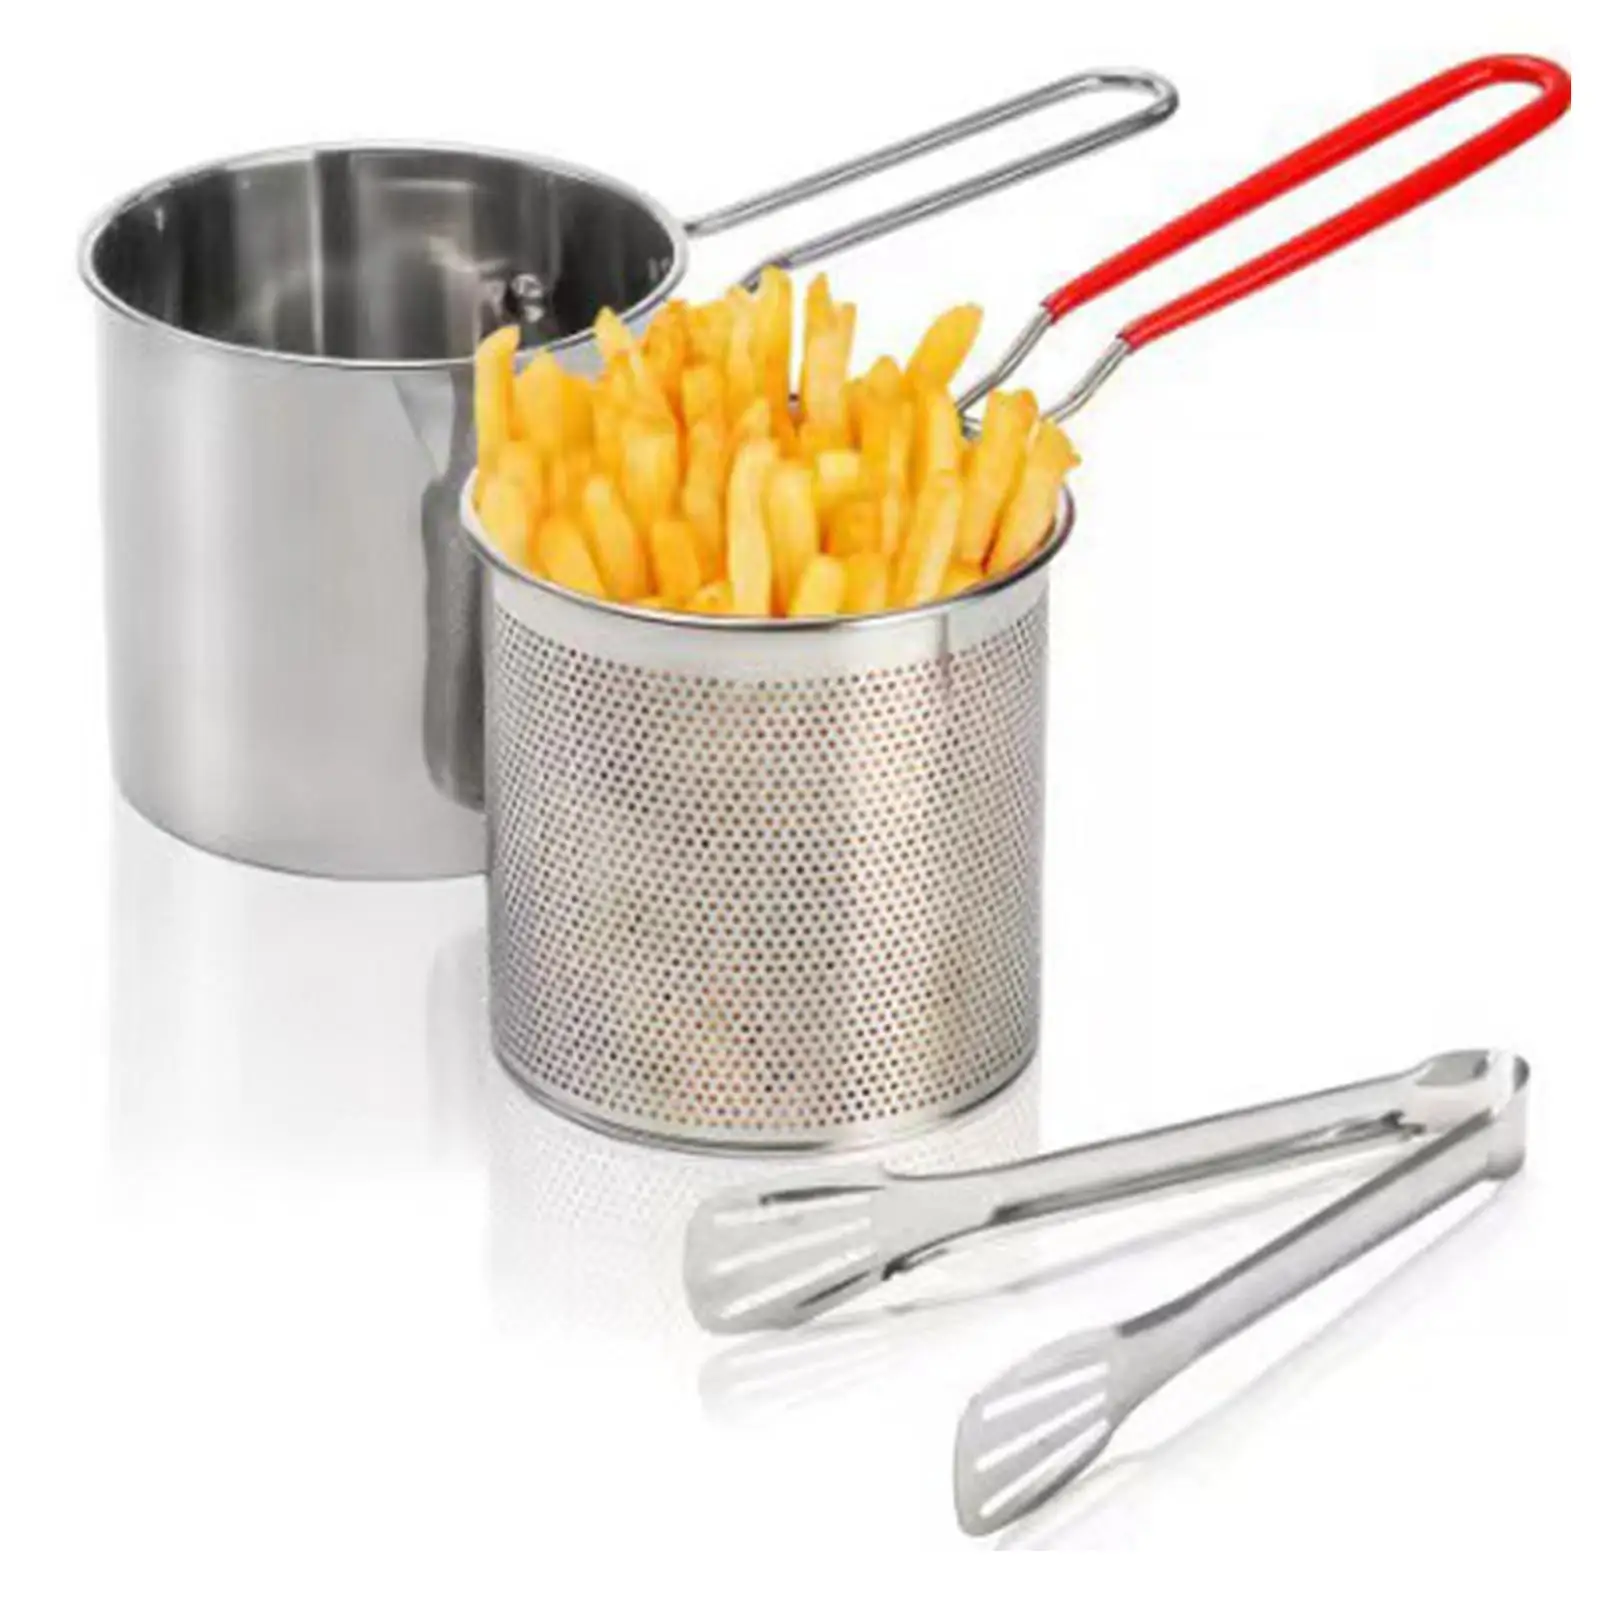 Small Deep Fryer Pot Wear Resistant Nonstick Milk Pot Universal Frying Basket for Dining Room Backpacking Baking Camping Frying